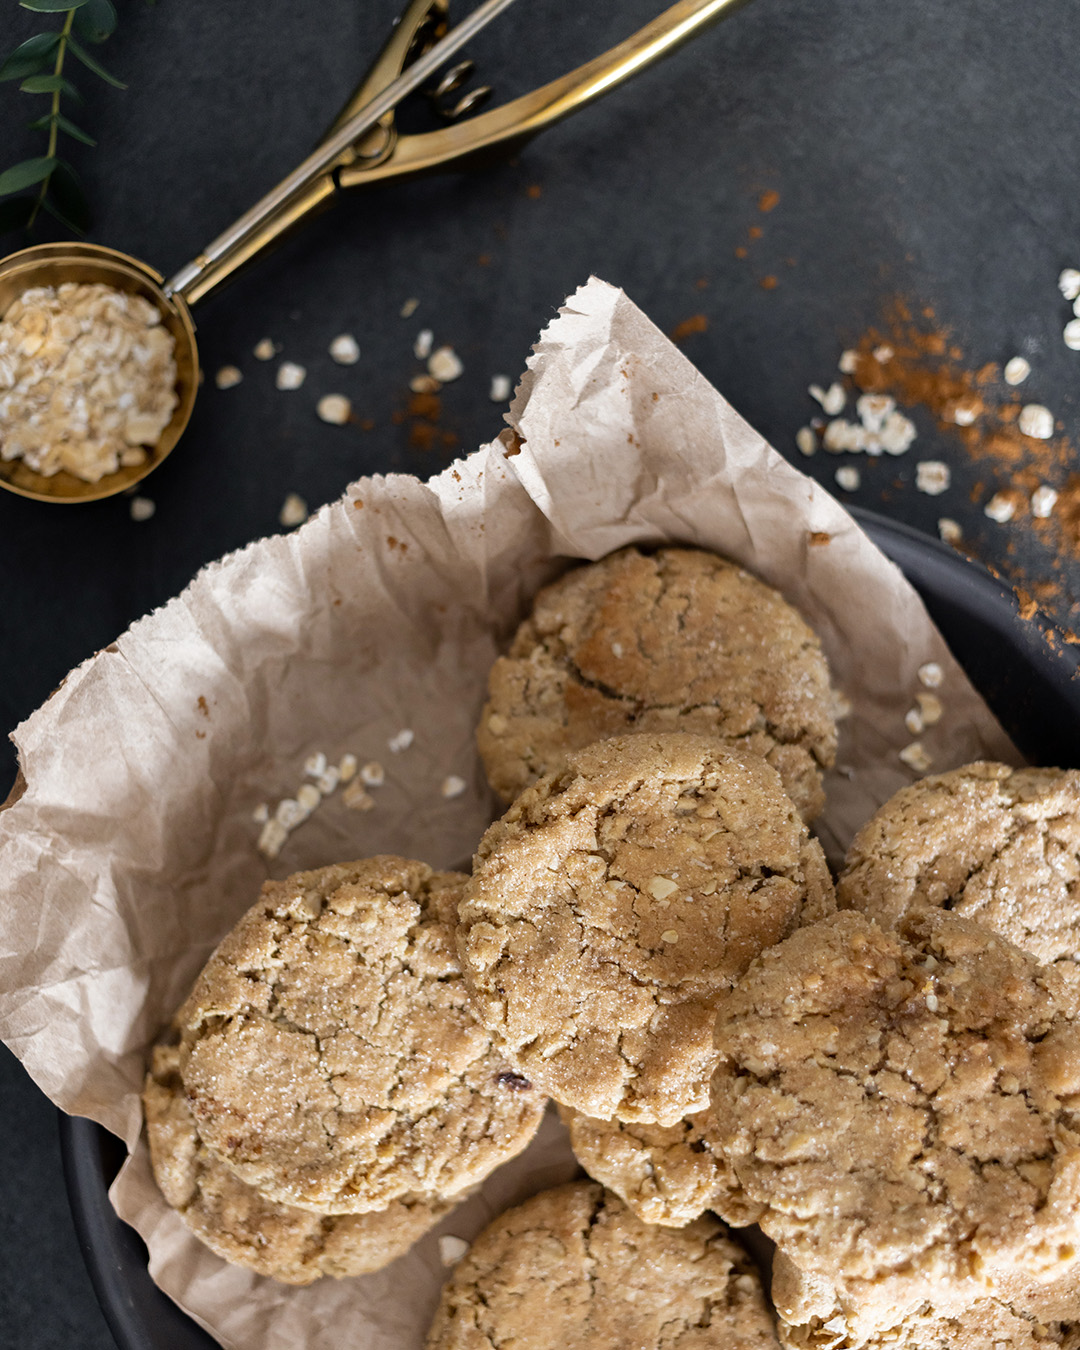 This is the recipe I've been trying to come up with for years and I've finally perfected it! These are truly the best soft and chewy oatmeal cookies.